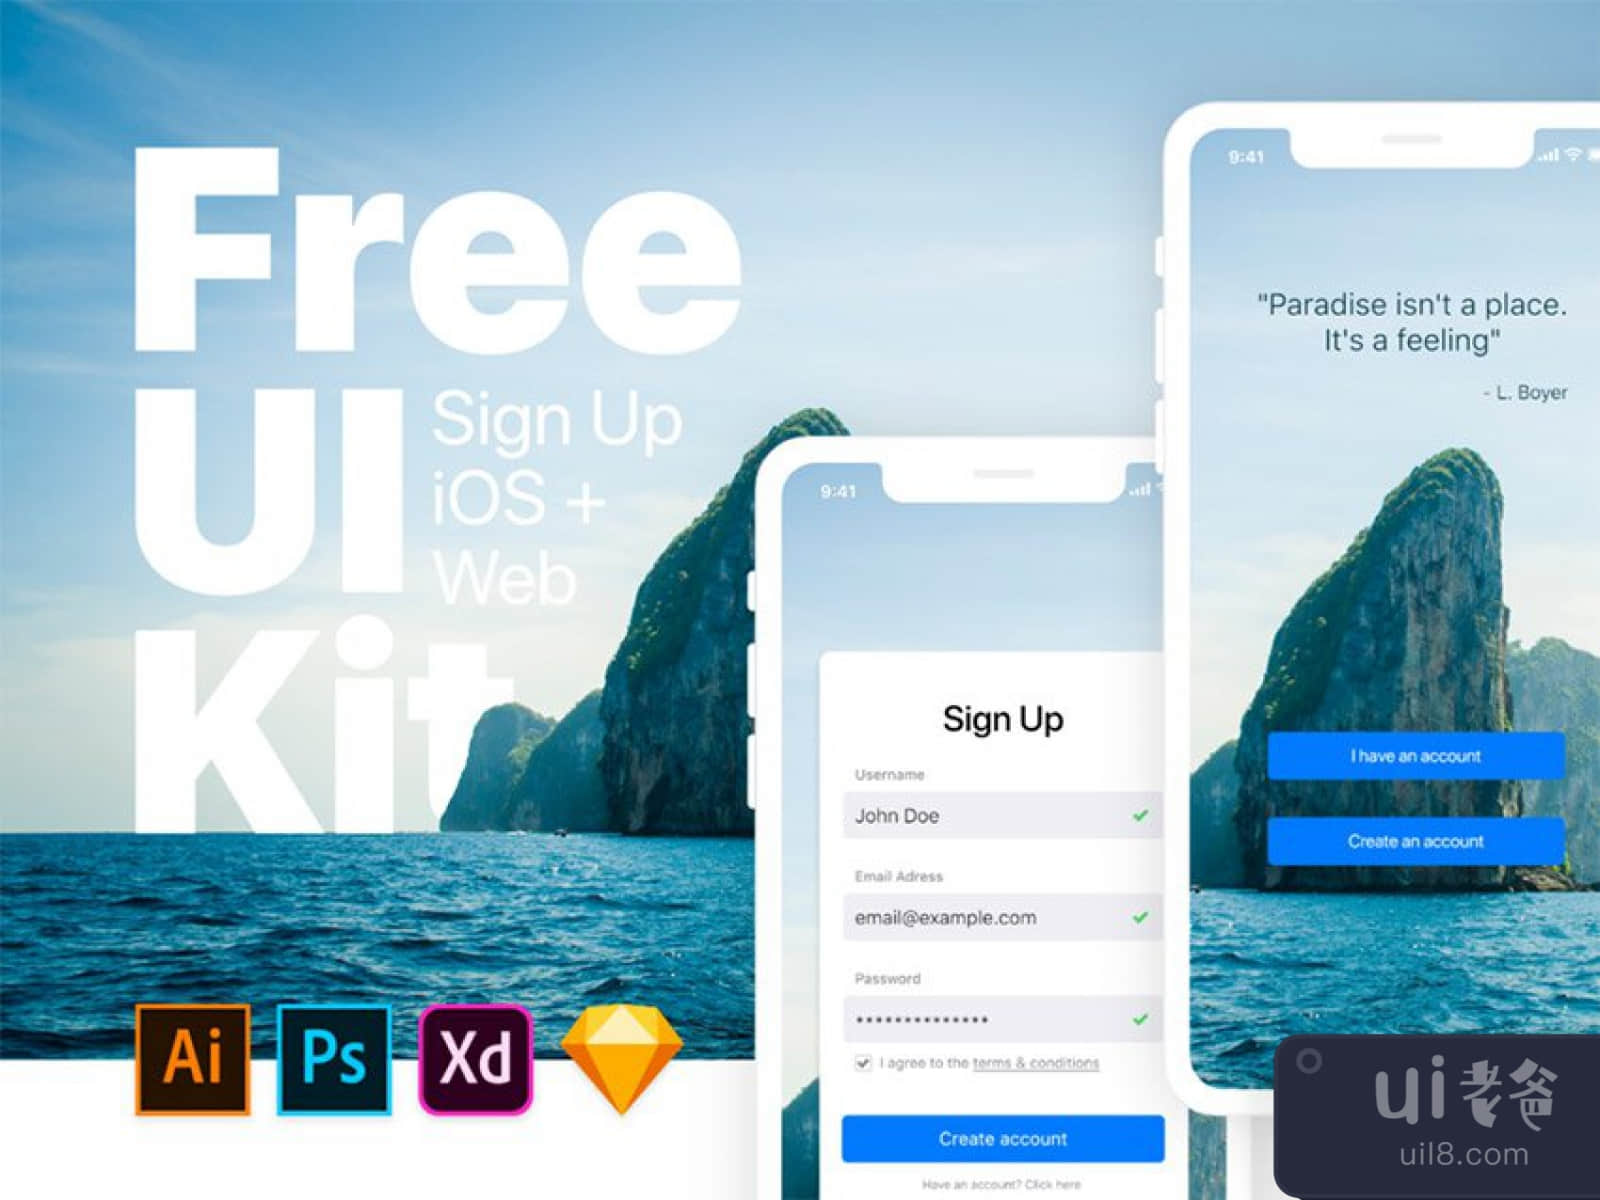 Sign Up iOS & Web UI Kit for Figma and Adobe XD No 1